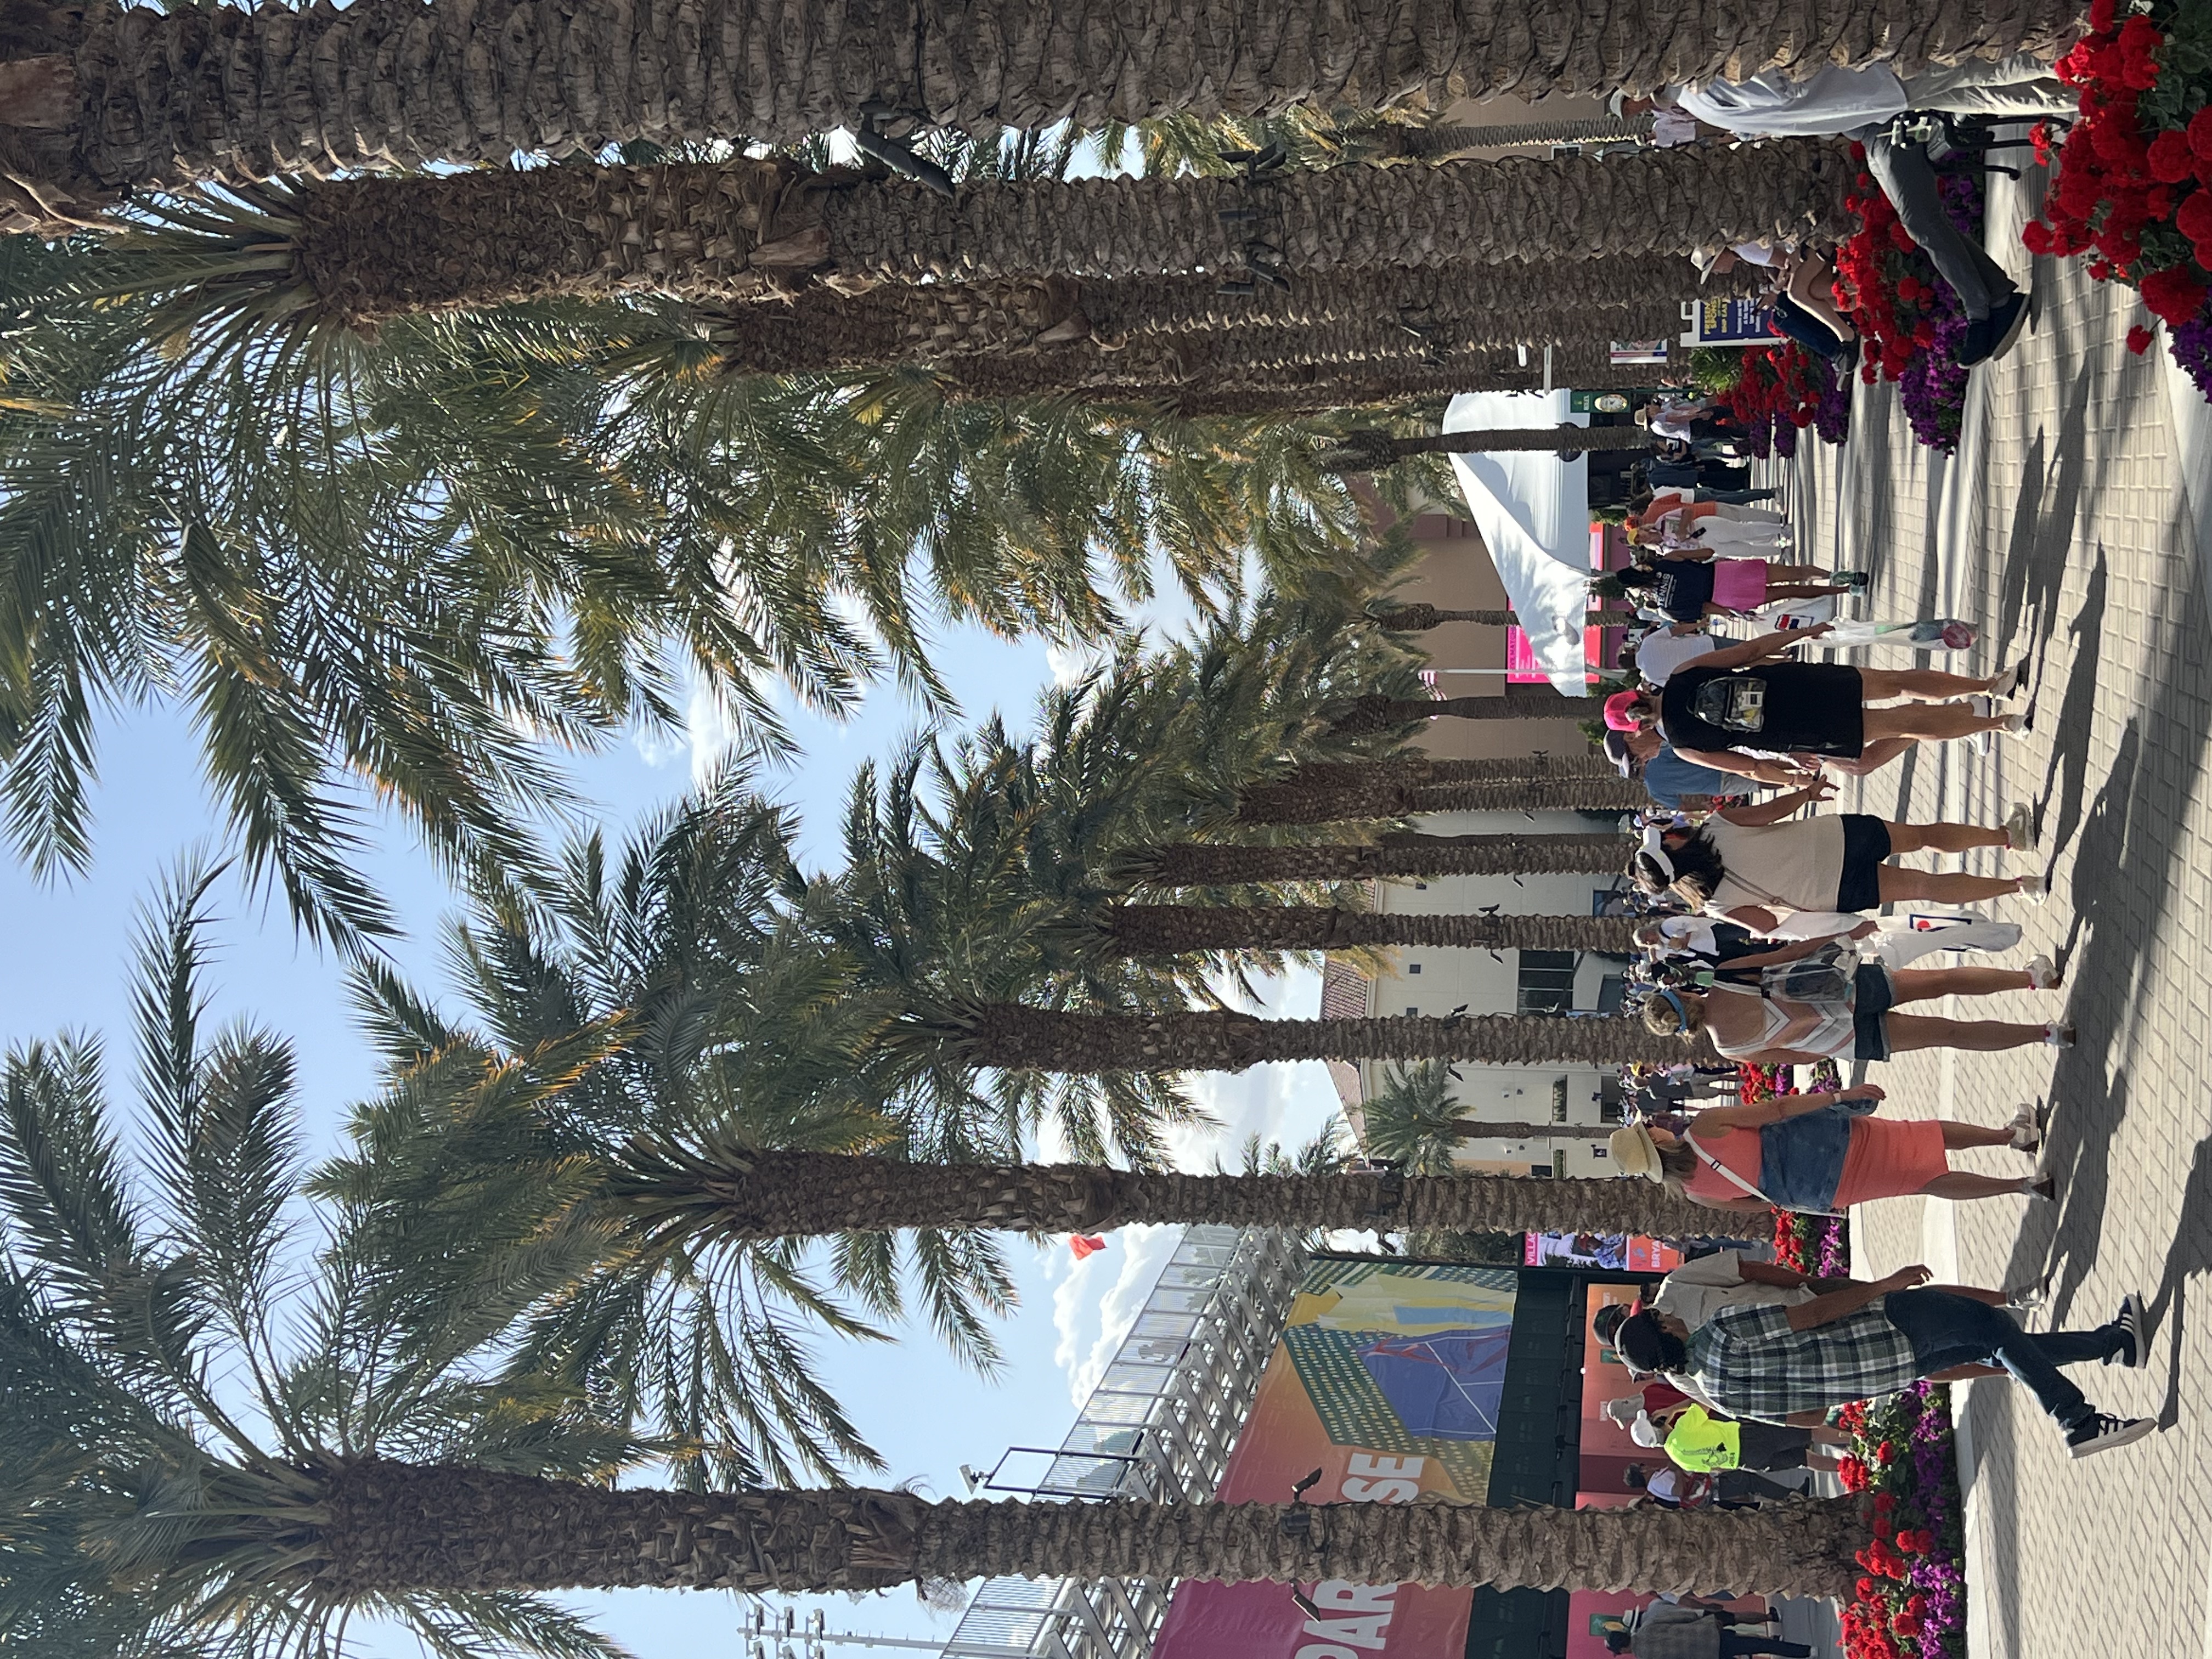 The main walk at the Indian Wells Tennis Garden with spectators and palm trees